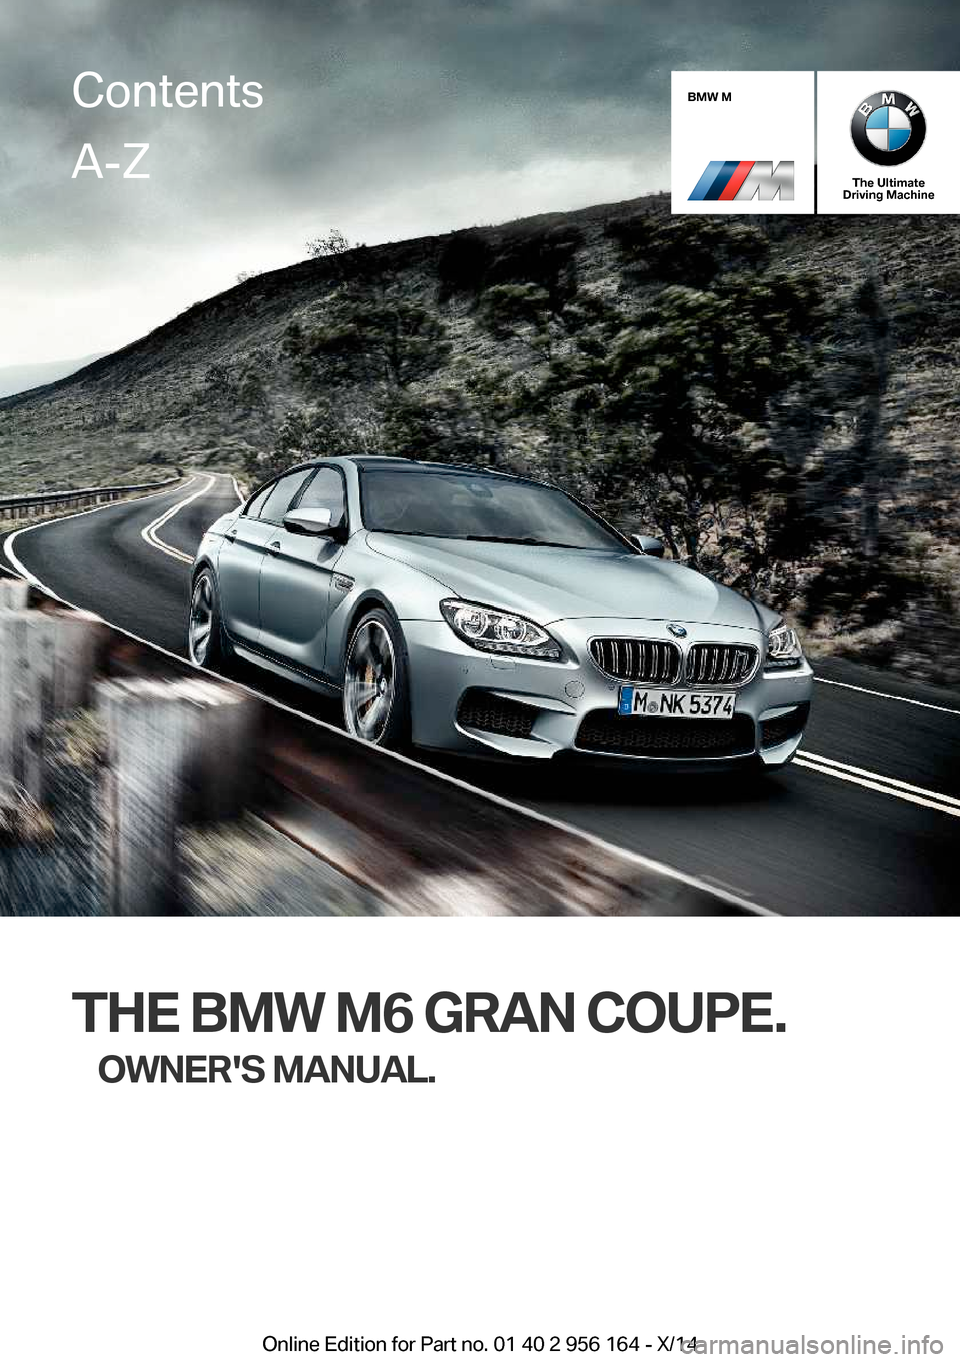 BMW M6 GRAN COUPE 2014 F06M Owners Manual BMW M
The Ultimate
Driving Machine
THE BMW M6 GRAN COUPE.
OWNERS MANUAL.
ContentsA-Z
Online Edition for Part no. 01 40 2 956 164 - X/14   